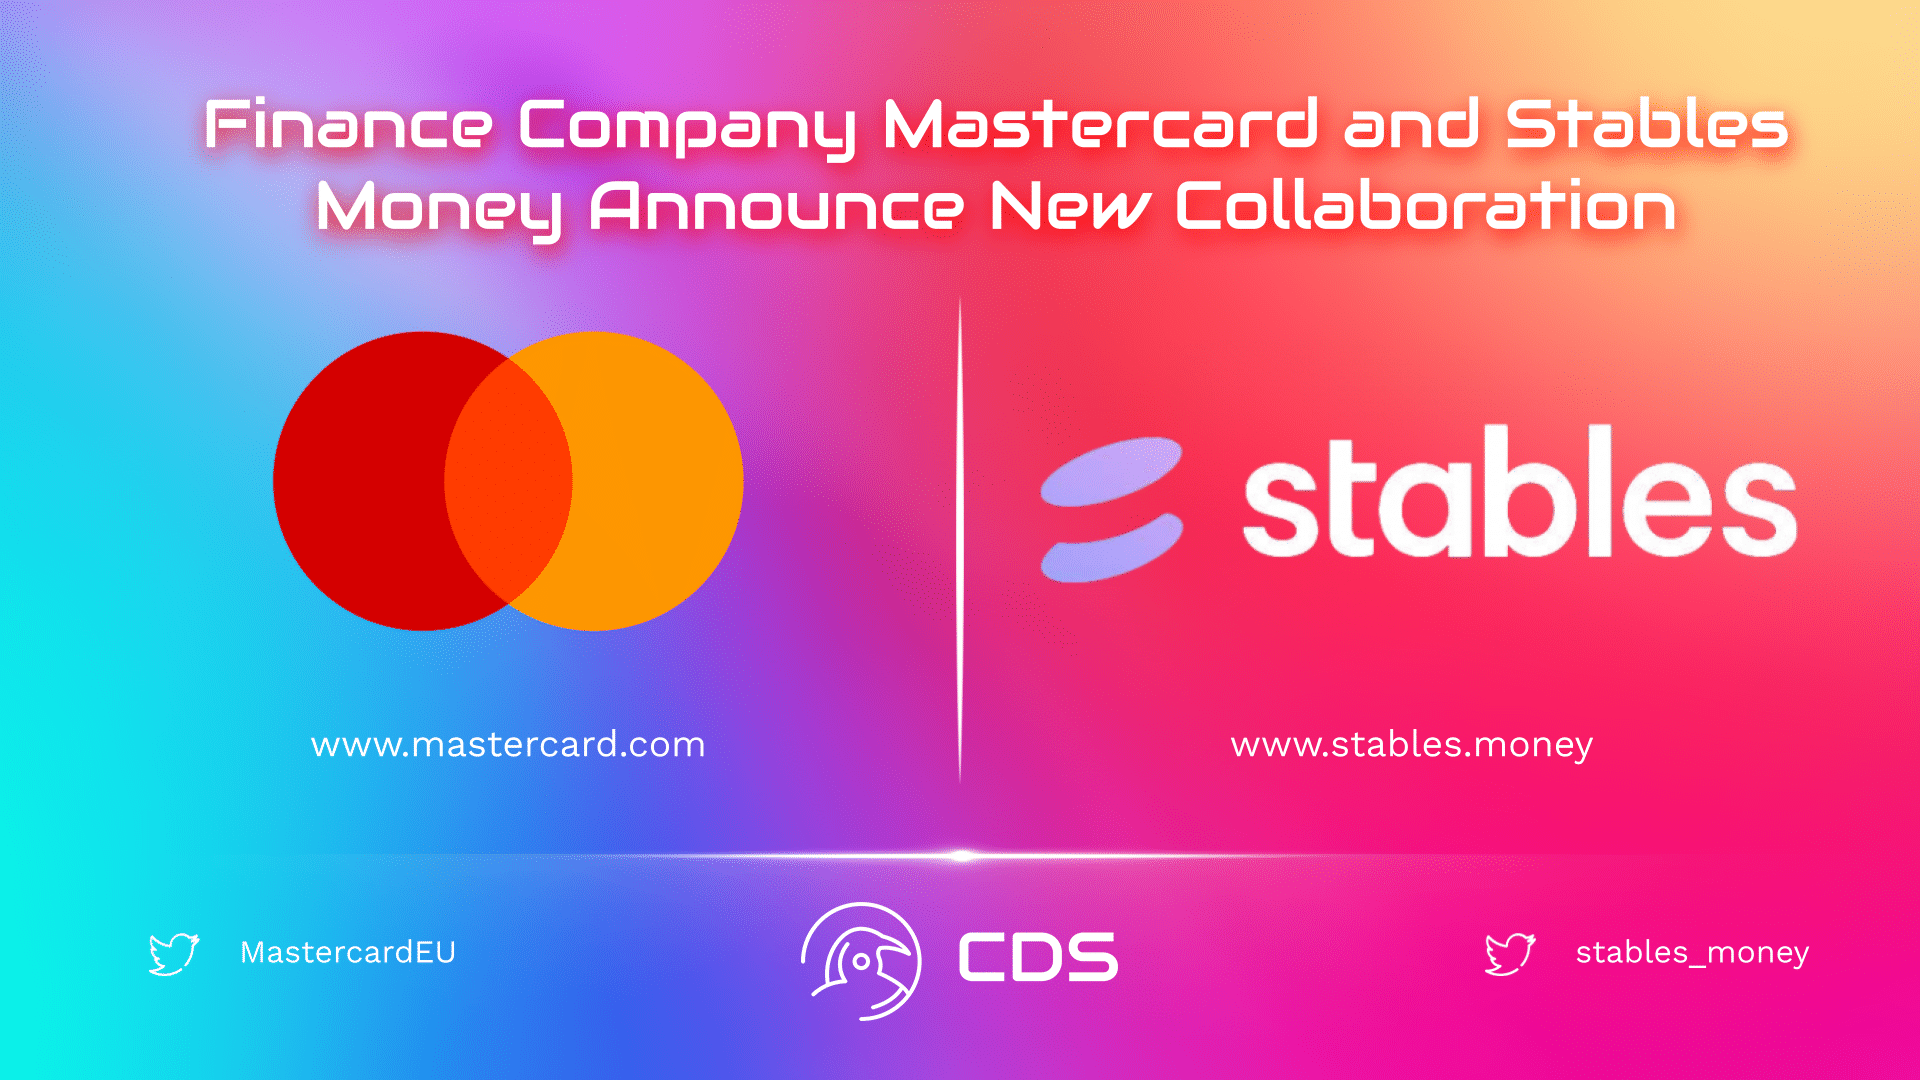 Finance Company Mastercard and Stables Money Announce New Collaboration